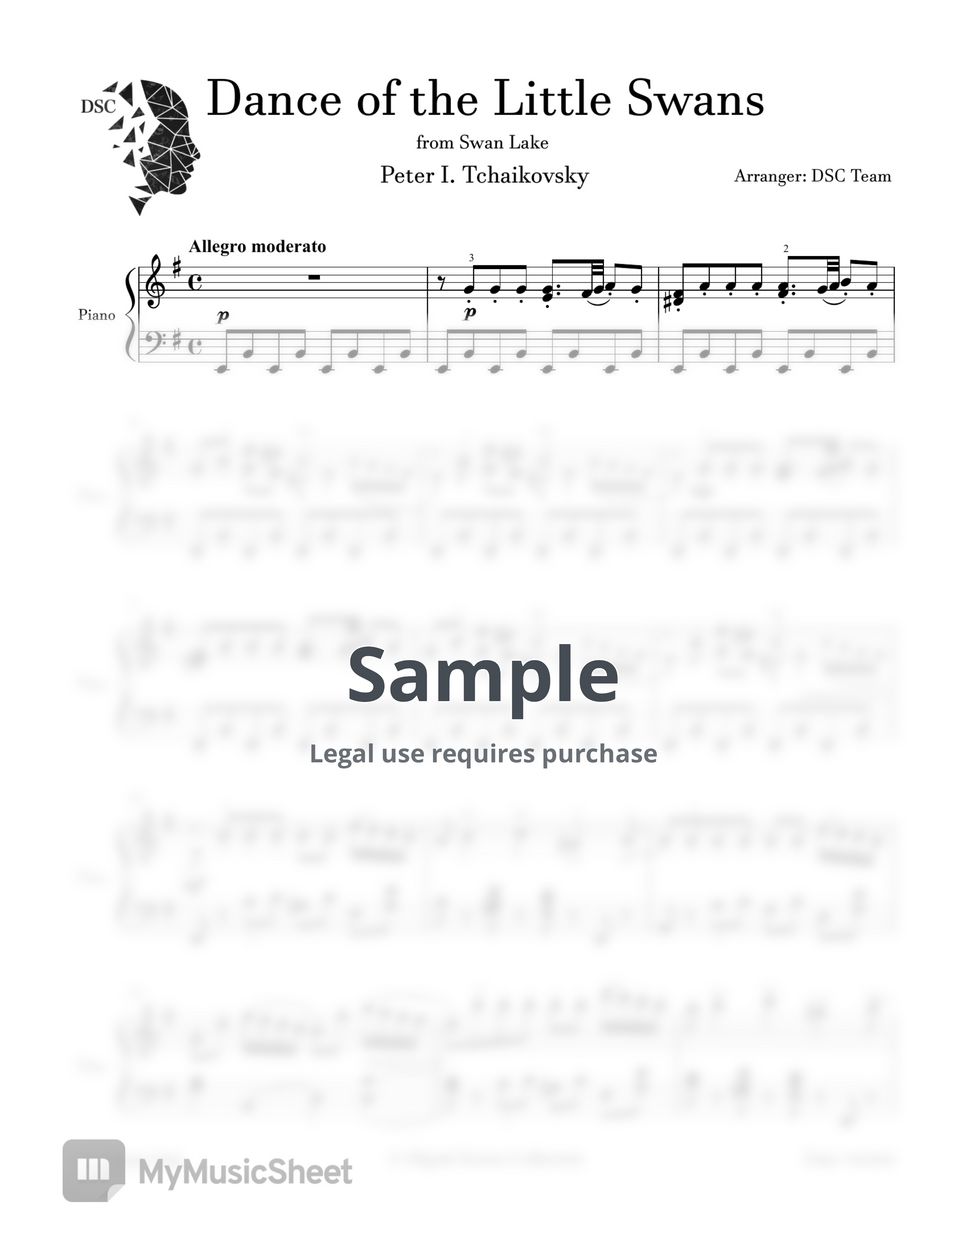 Tchaikovsky - Dance of the Little Swans by Digital Scores Collection